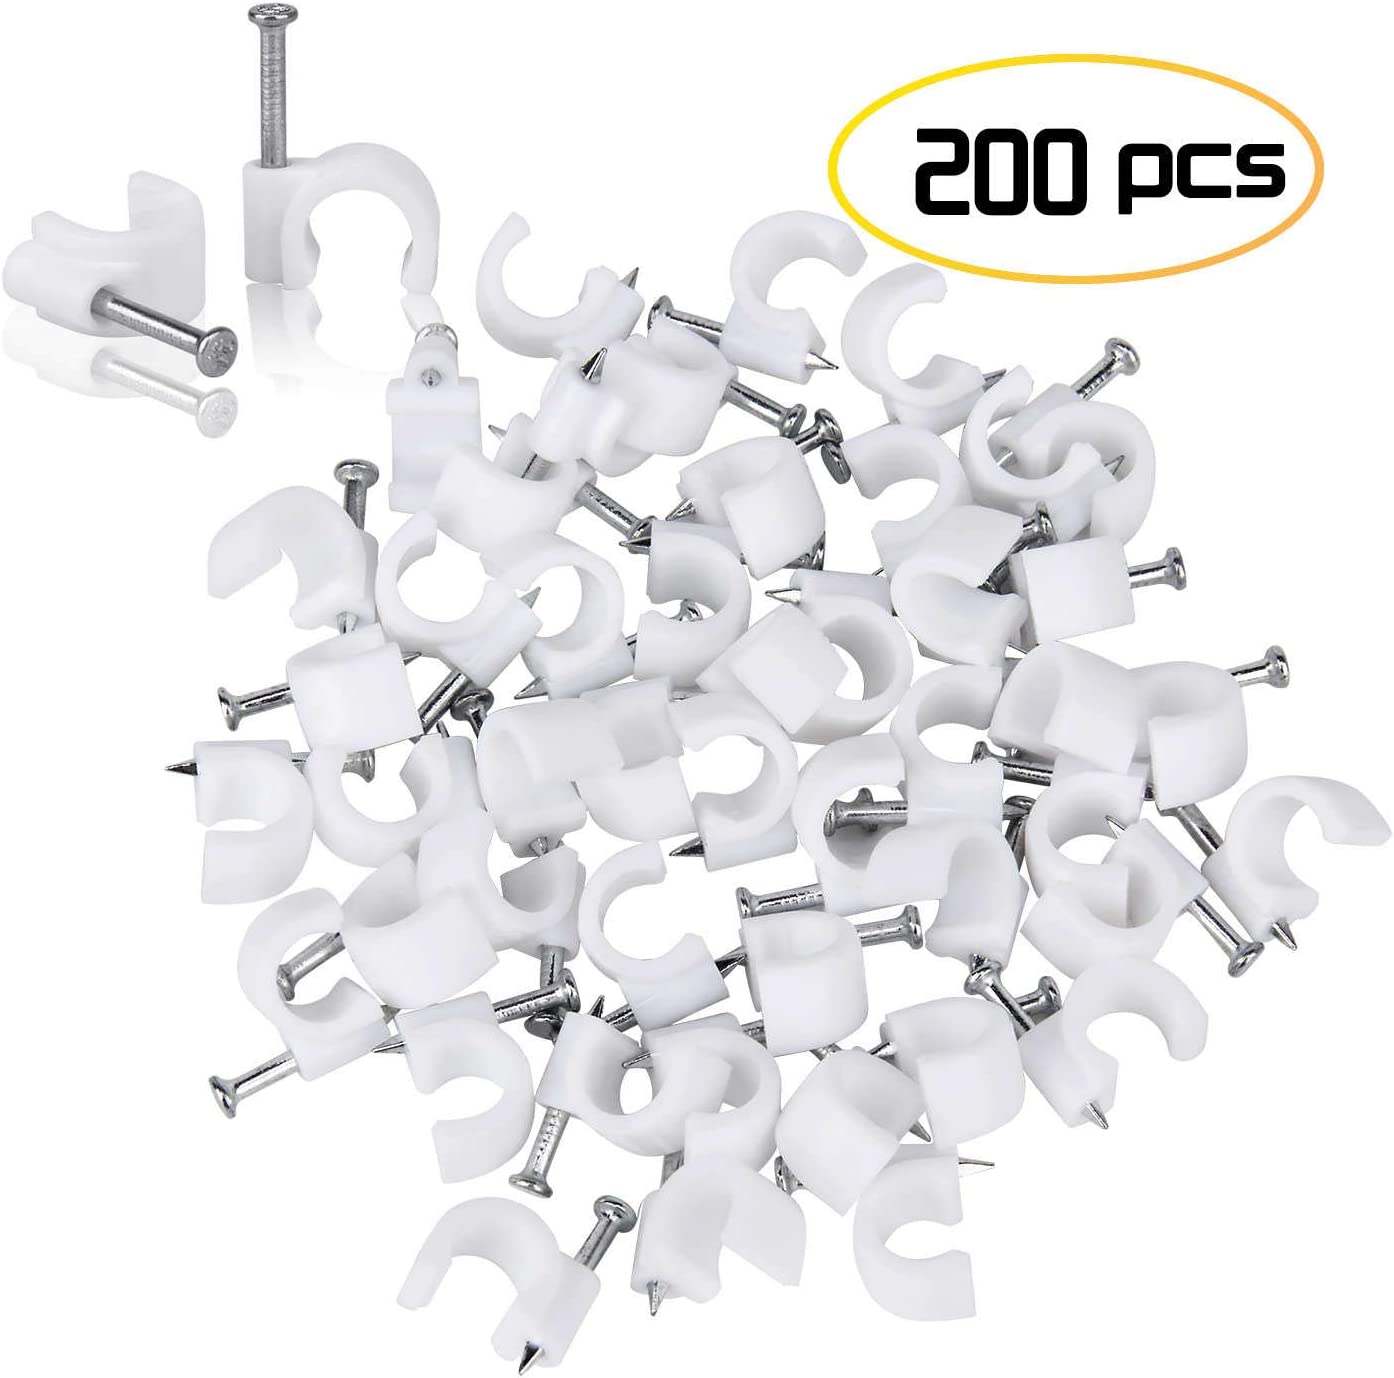 Easytle Cable Wire Clips 4mm 6mm 8mm 10mm (Pack of 200)Cable Management RG6 RG59 CAT5 CAT6 RJ45 Electrical Ethernet Dish TV Speaker Wire Cord Tie Holder Single Coaxial Nail Clamps